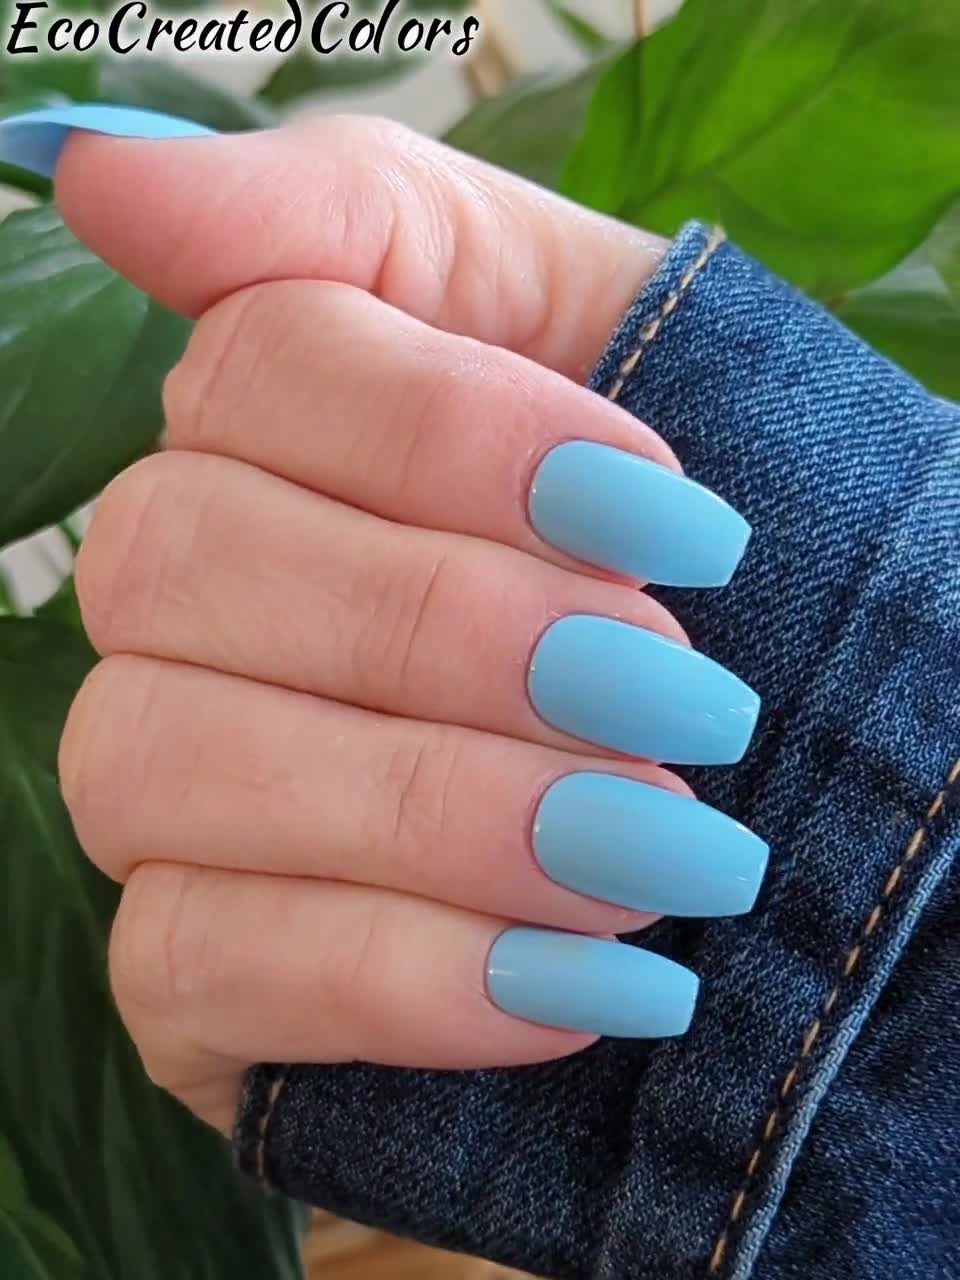 What color nail polish goes with a very very light blue dress best? - Quora